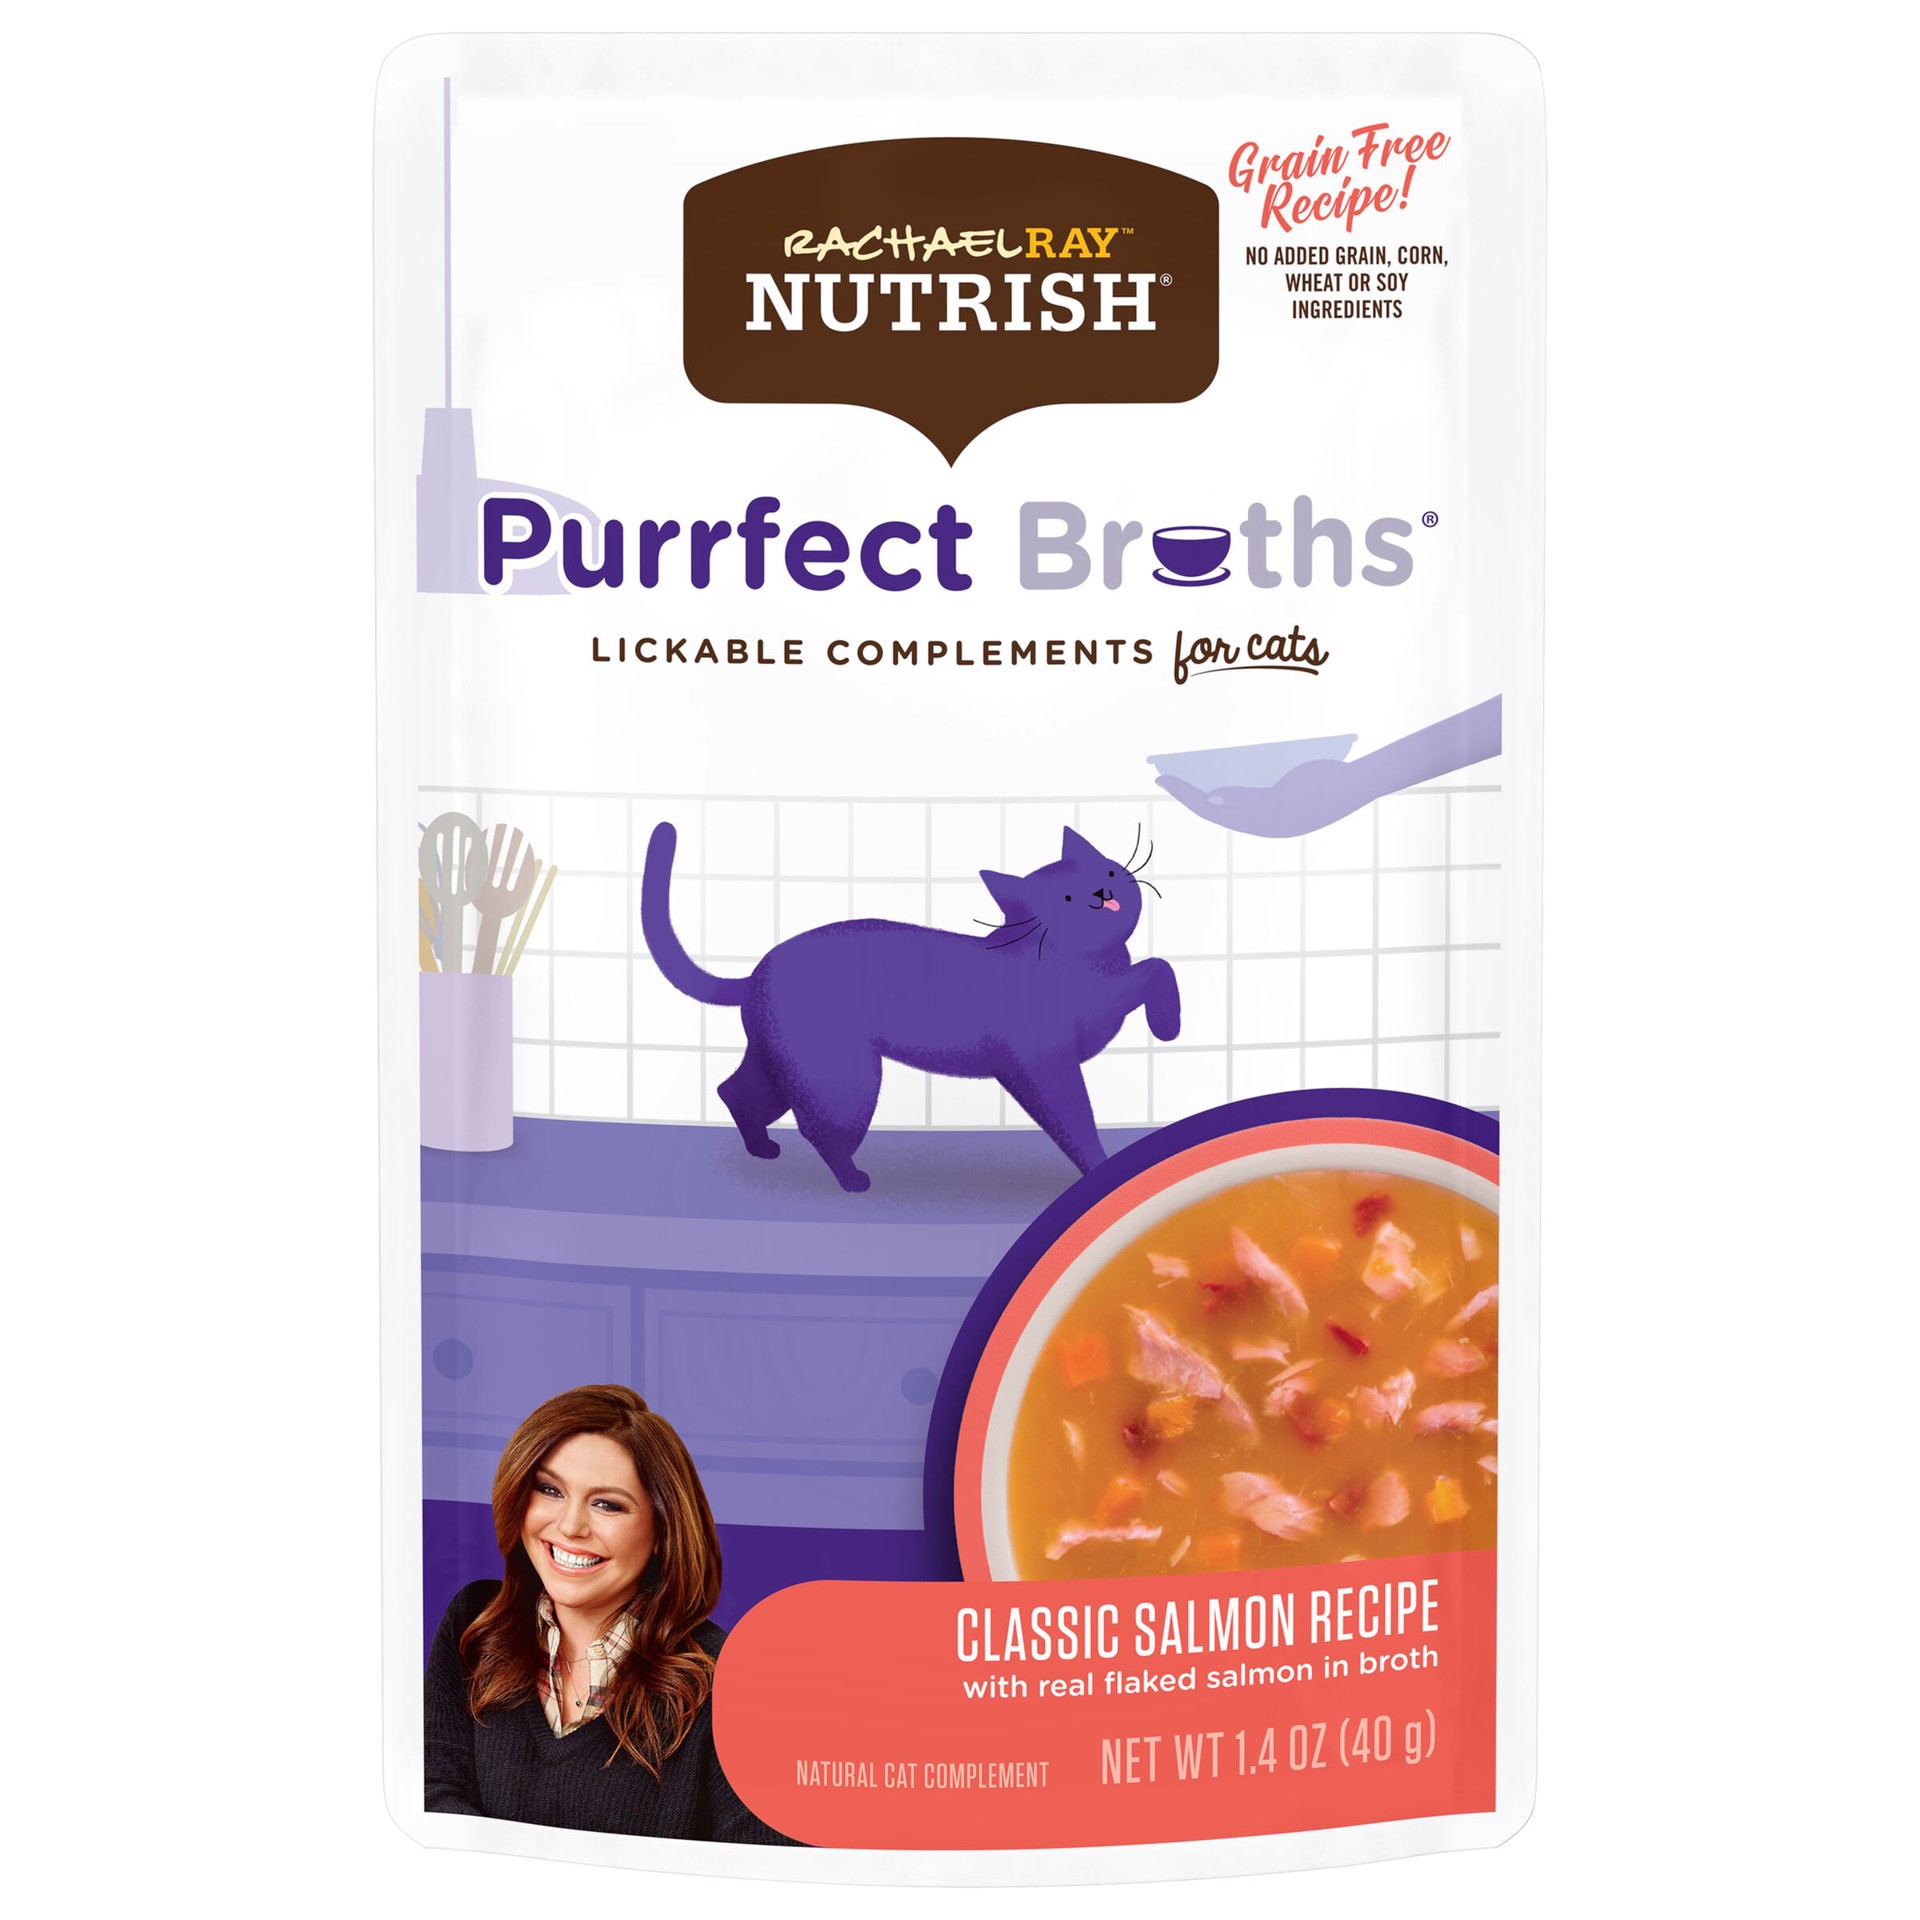 slide 1 of 6, Rachael Ray Nutrish Purrfect Broths Lickable Cat Treats and Meal Complements, Classic Salmon Recipe, 1.4 Ounce Pouch, 1.4 oz